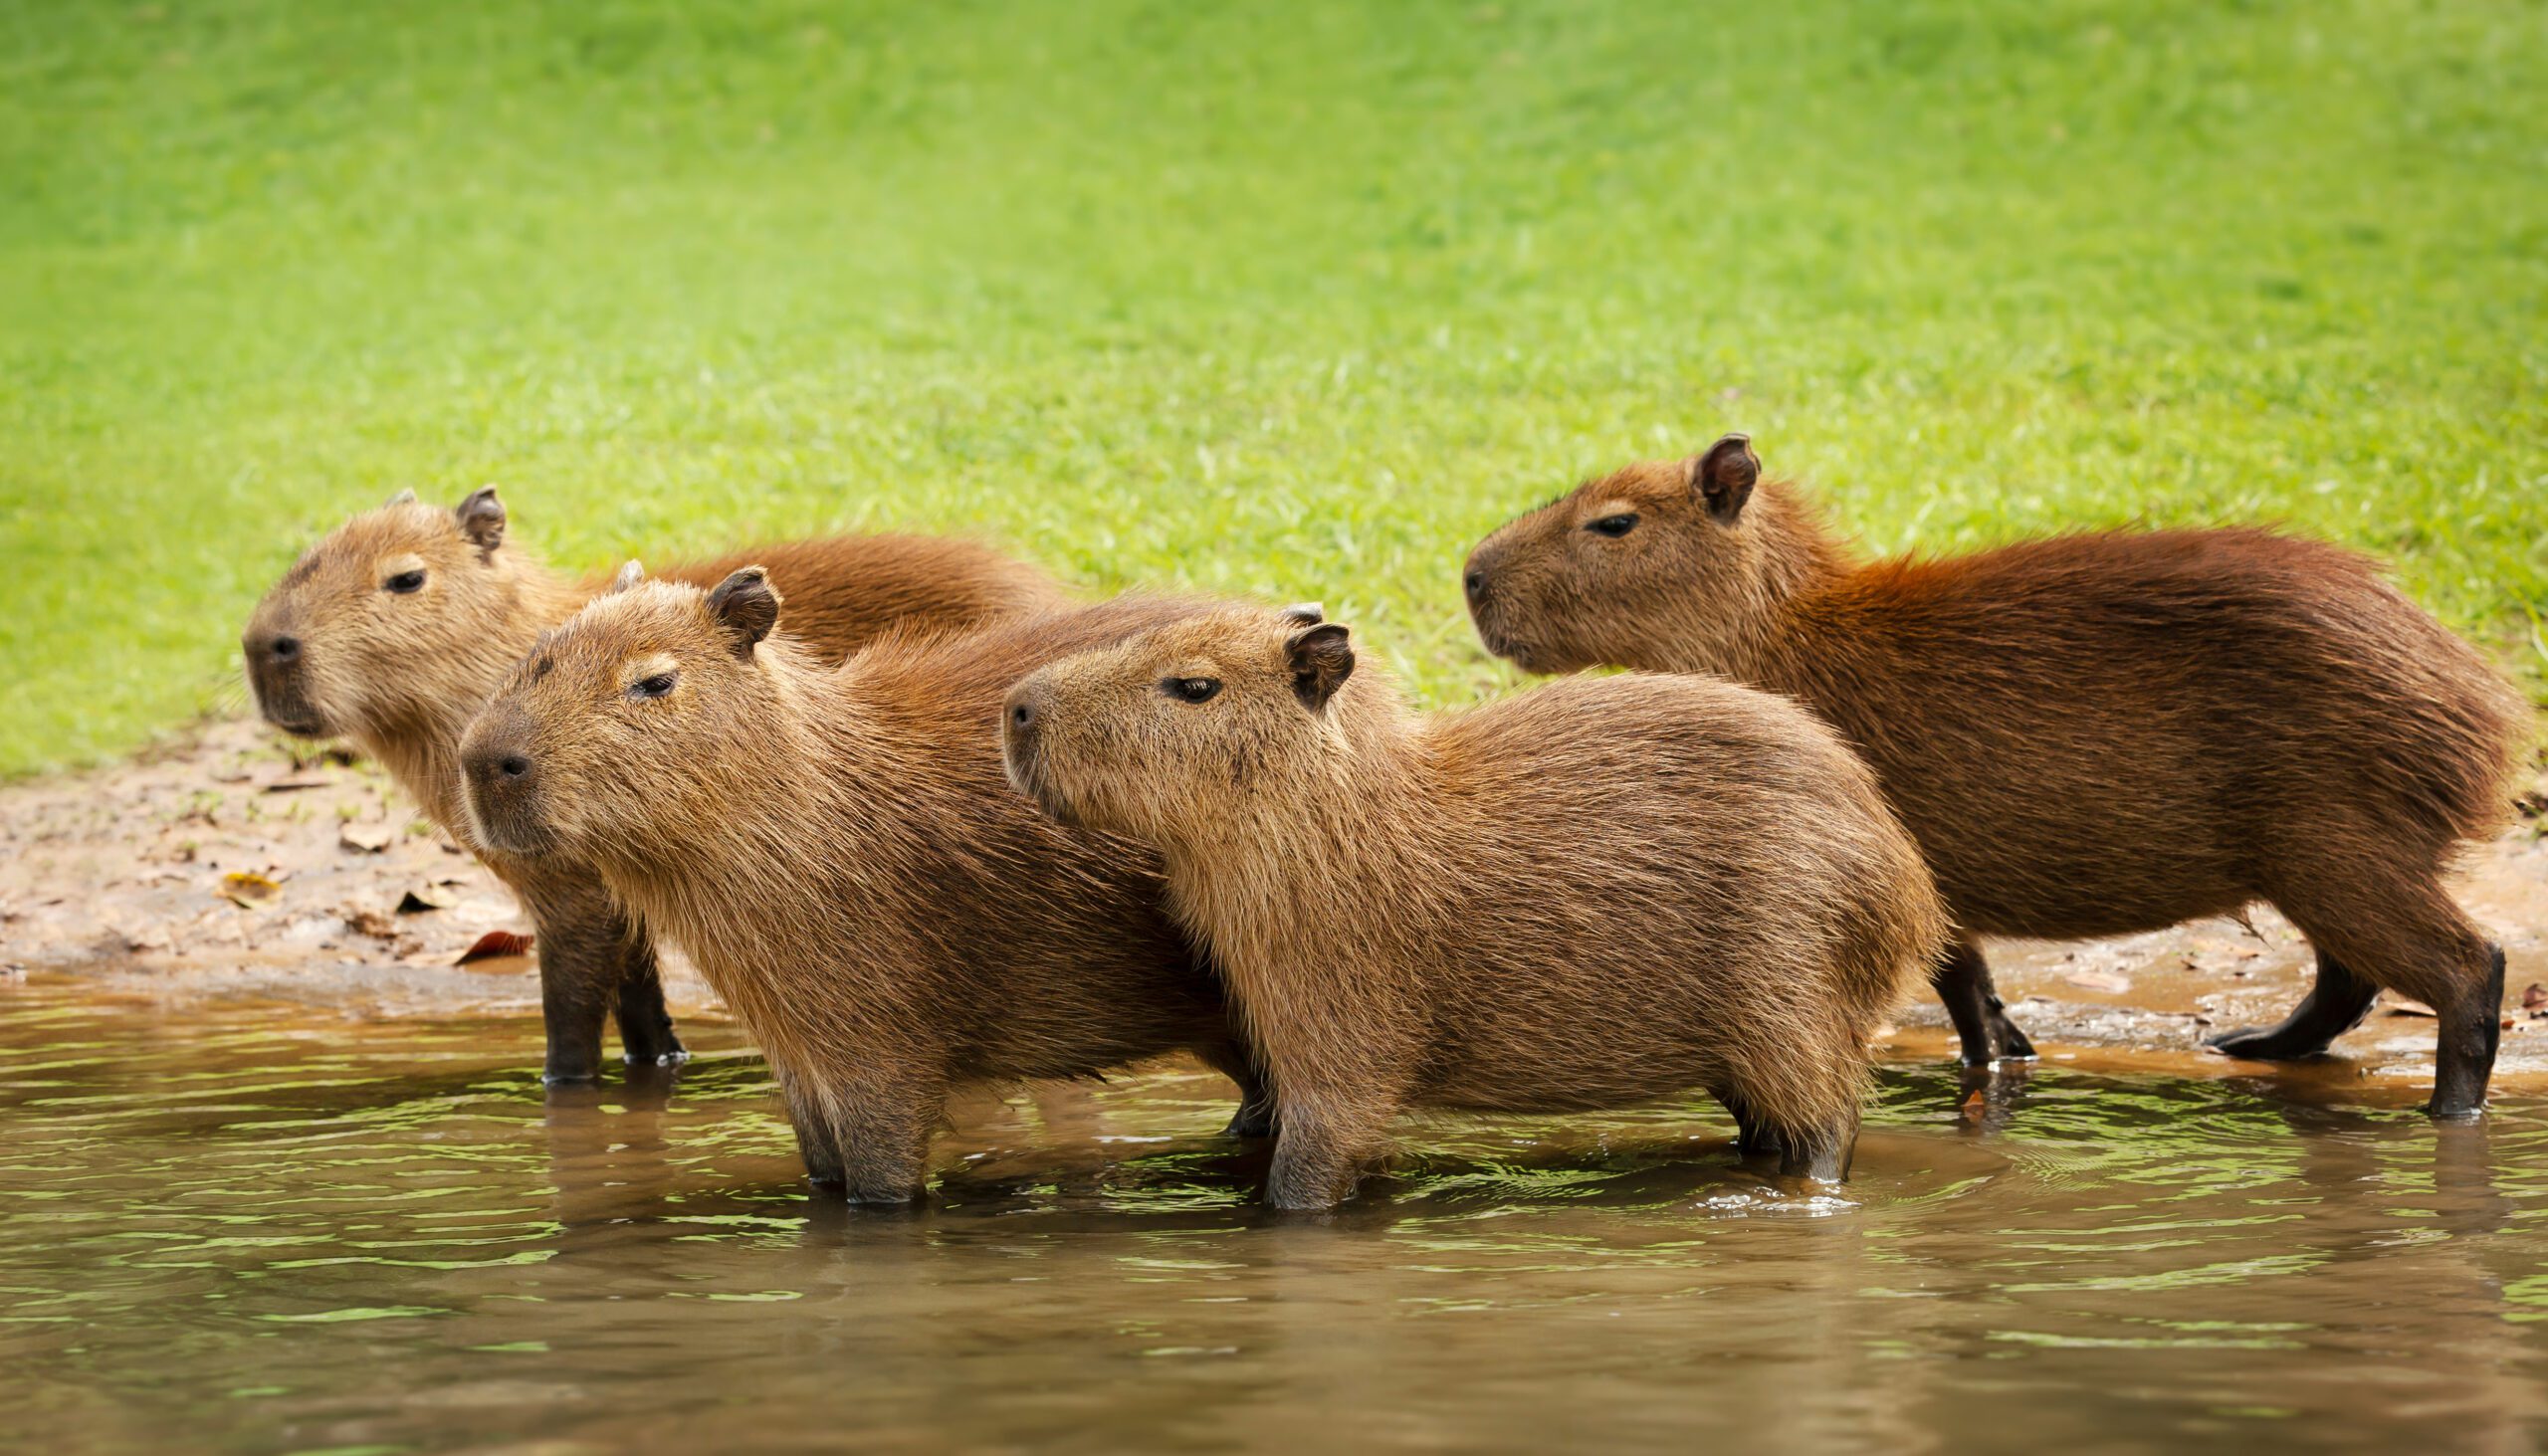 Ten Interesting Facts About The Capybara, The World's Largest Rodent